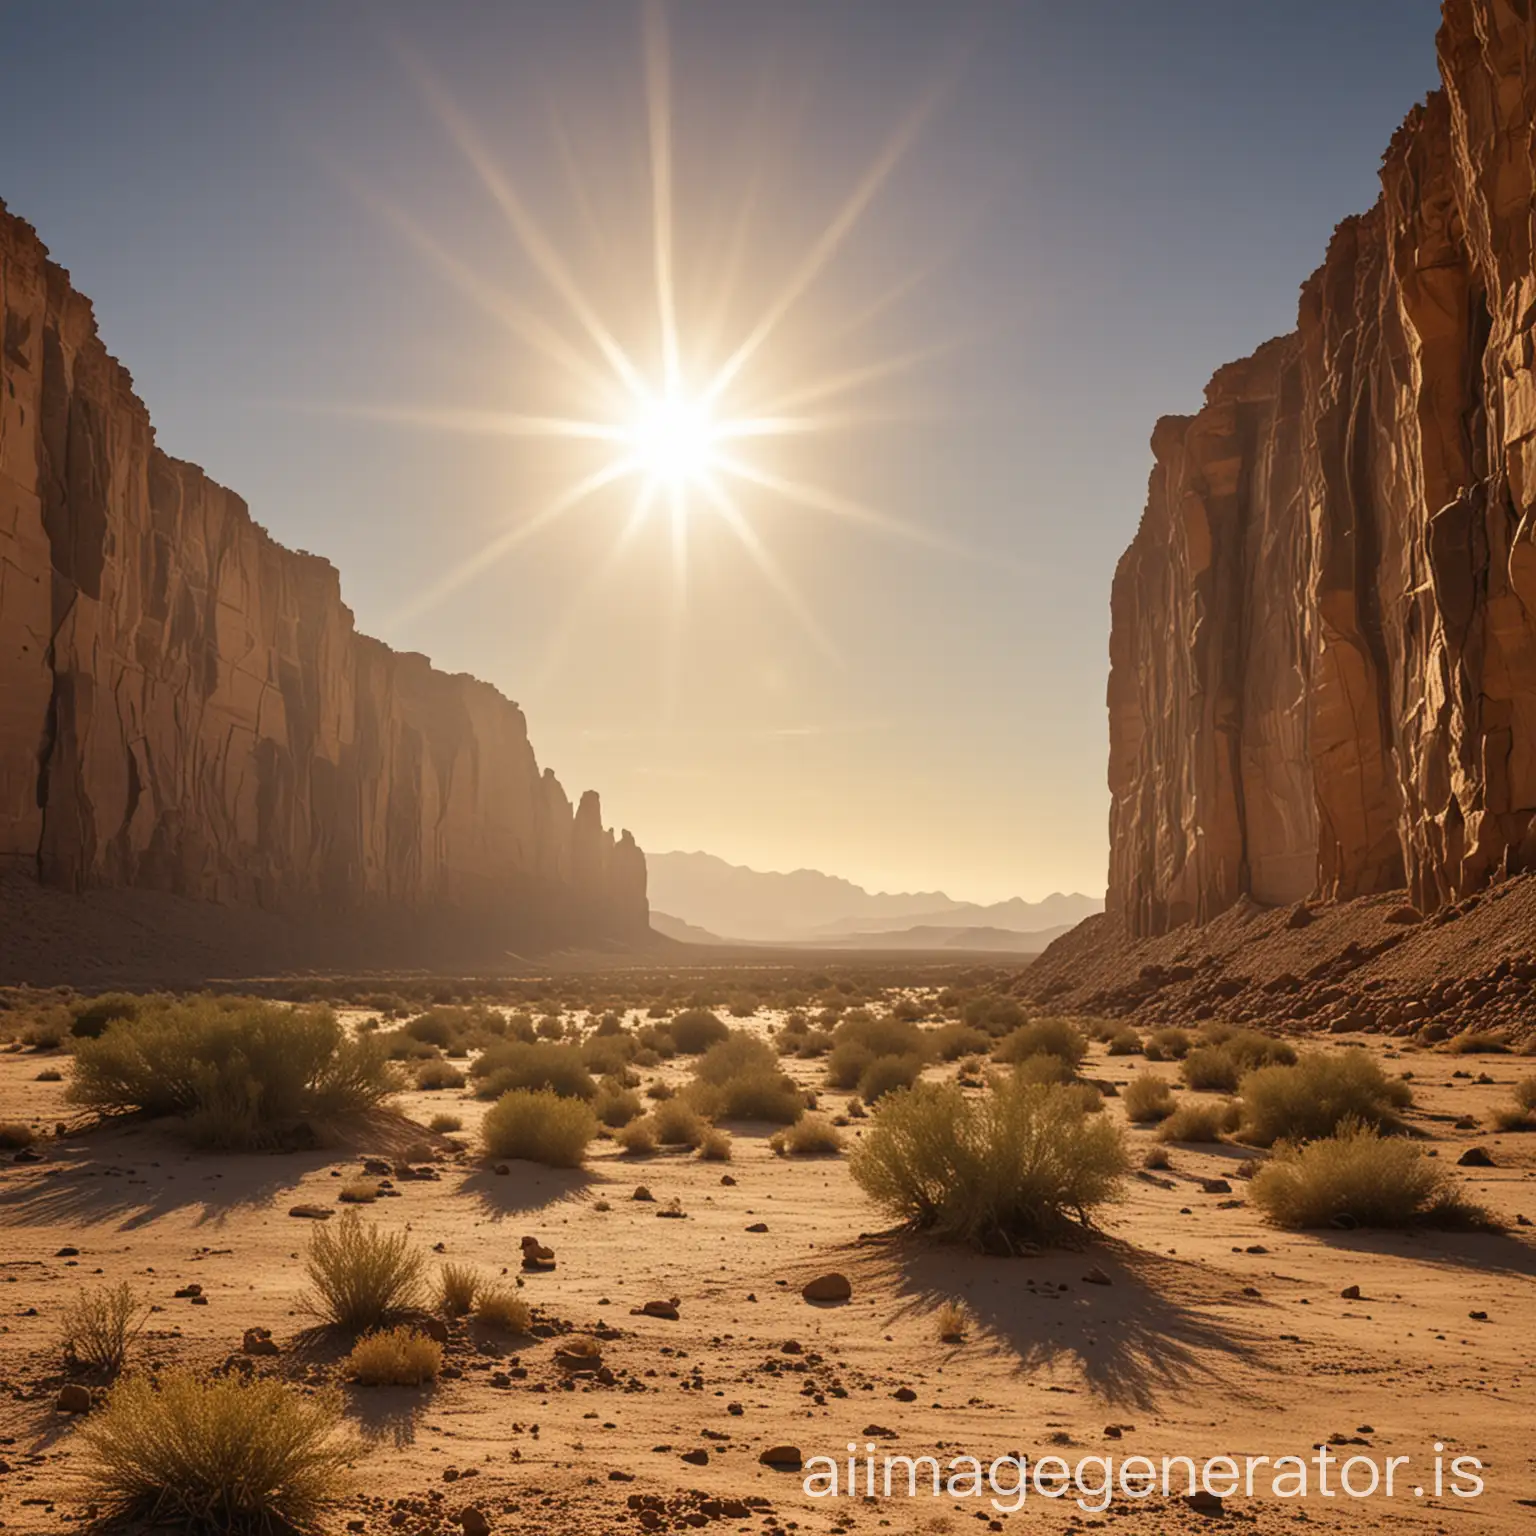 Vast-Desert-Landscape-with-Majestic-Cliff-and-Dual-Suns